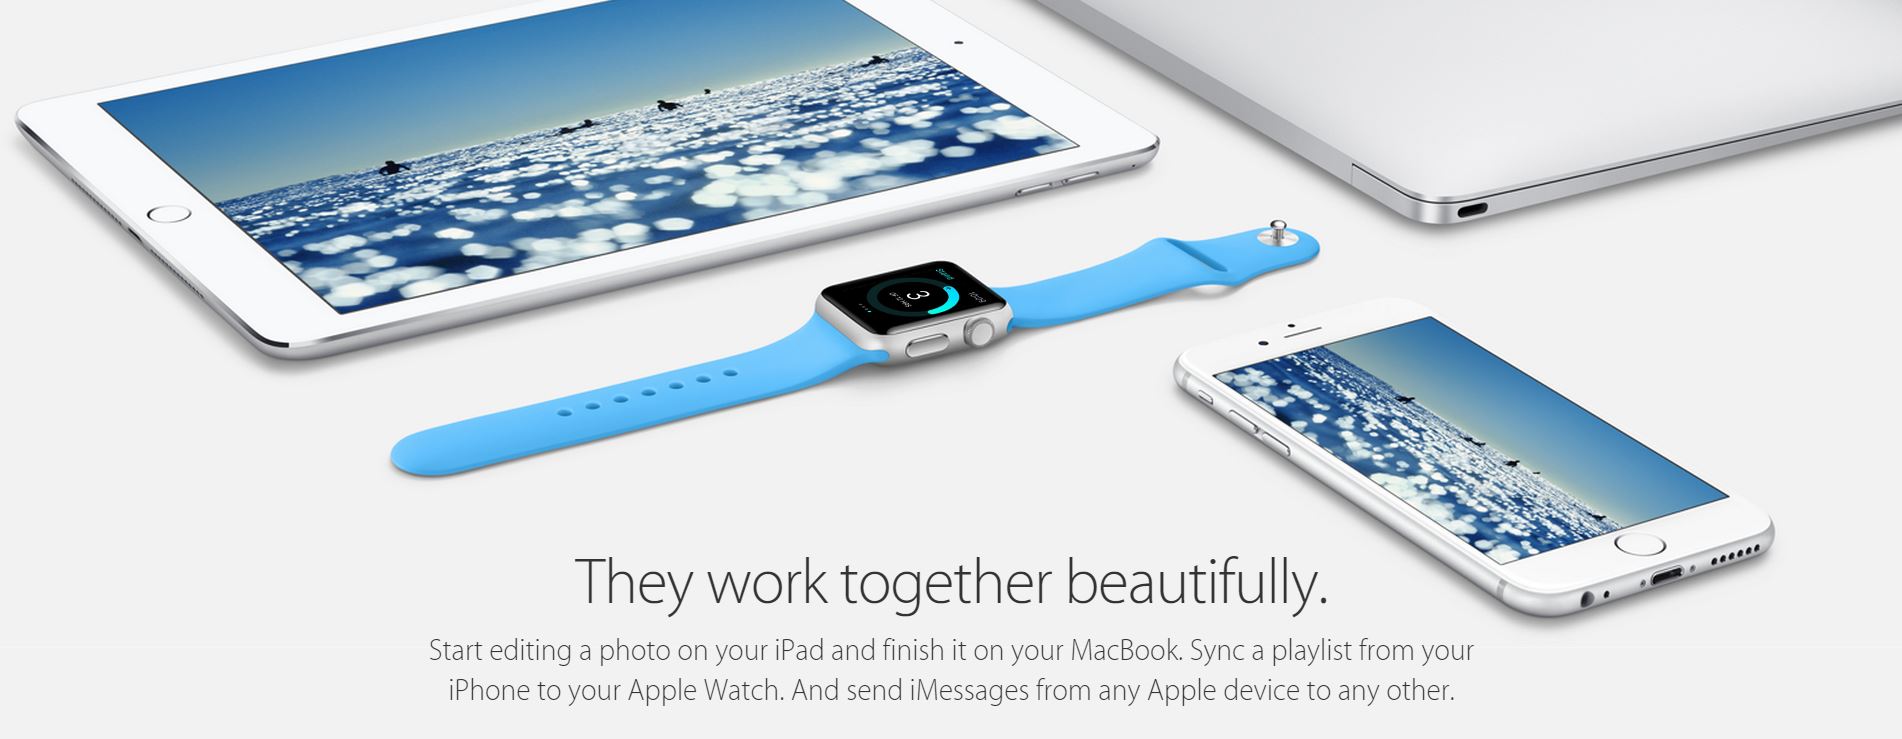 Apple Watch connesso all'iphone mac